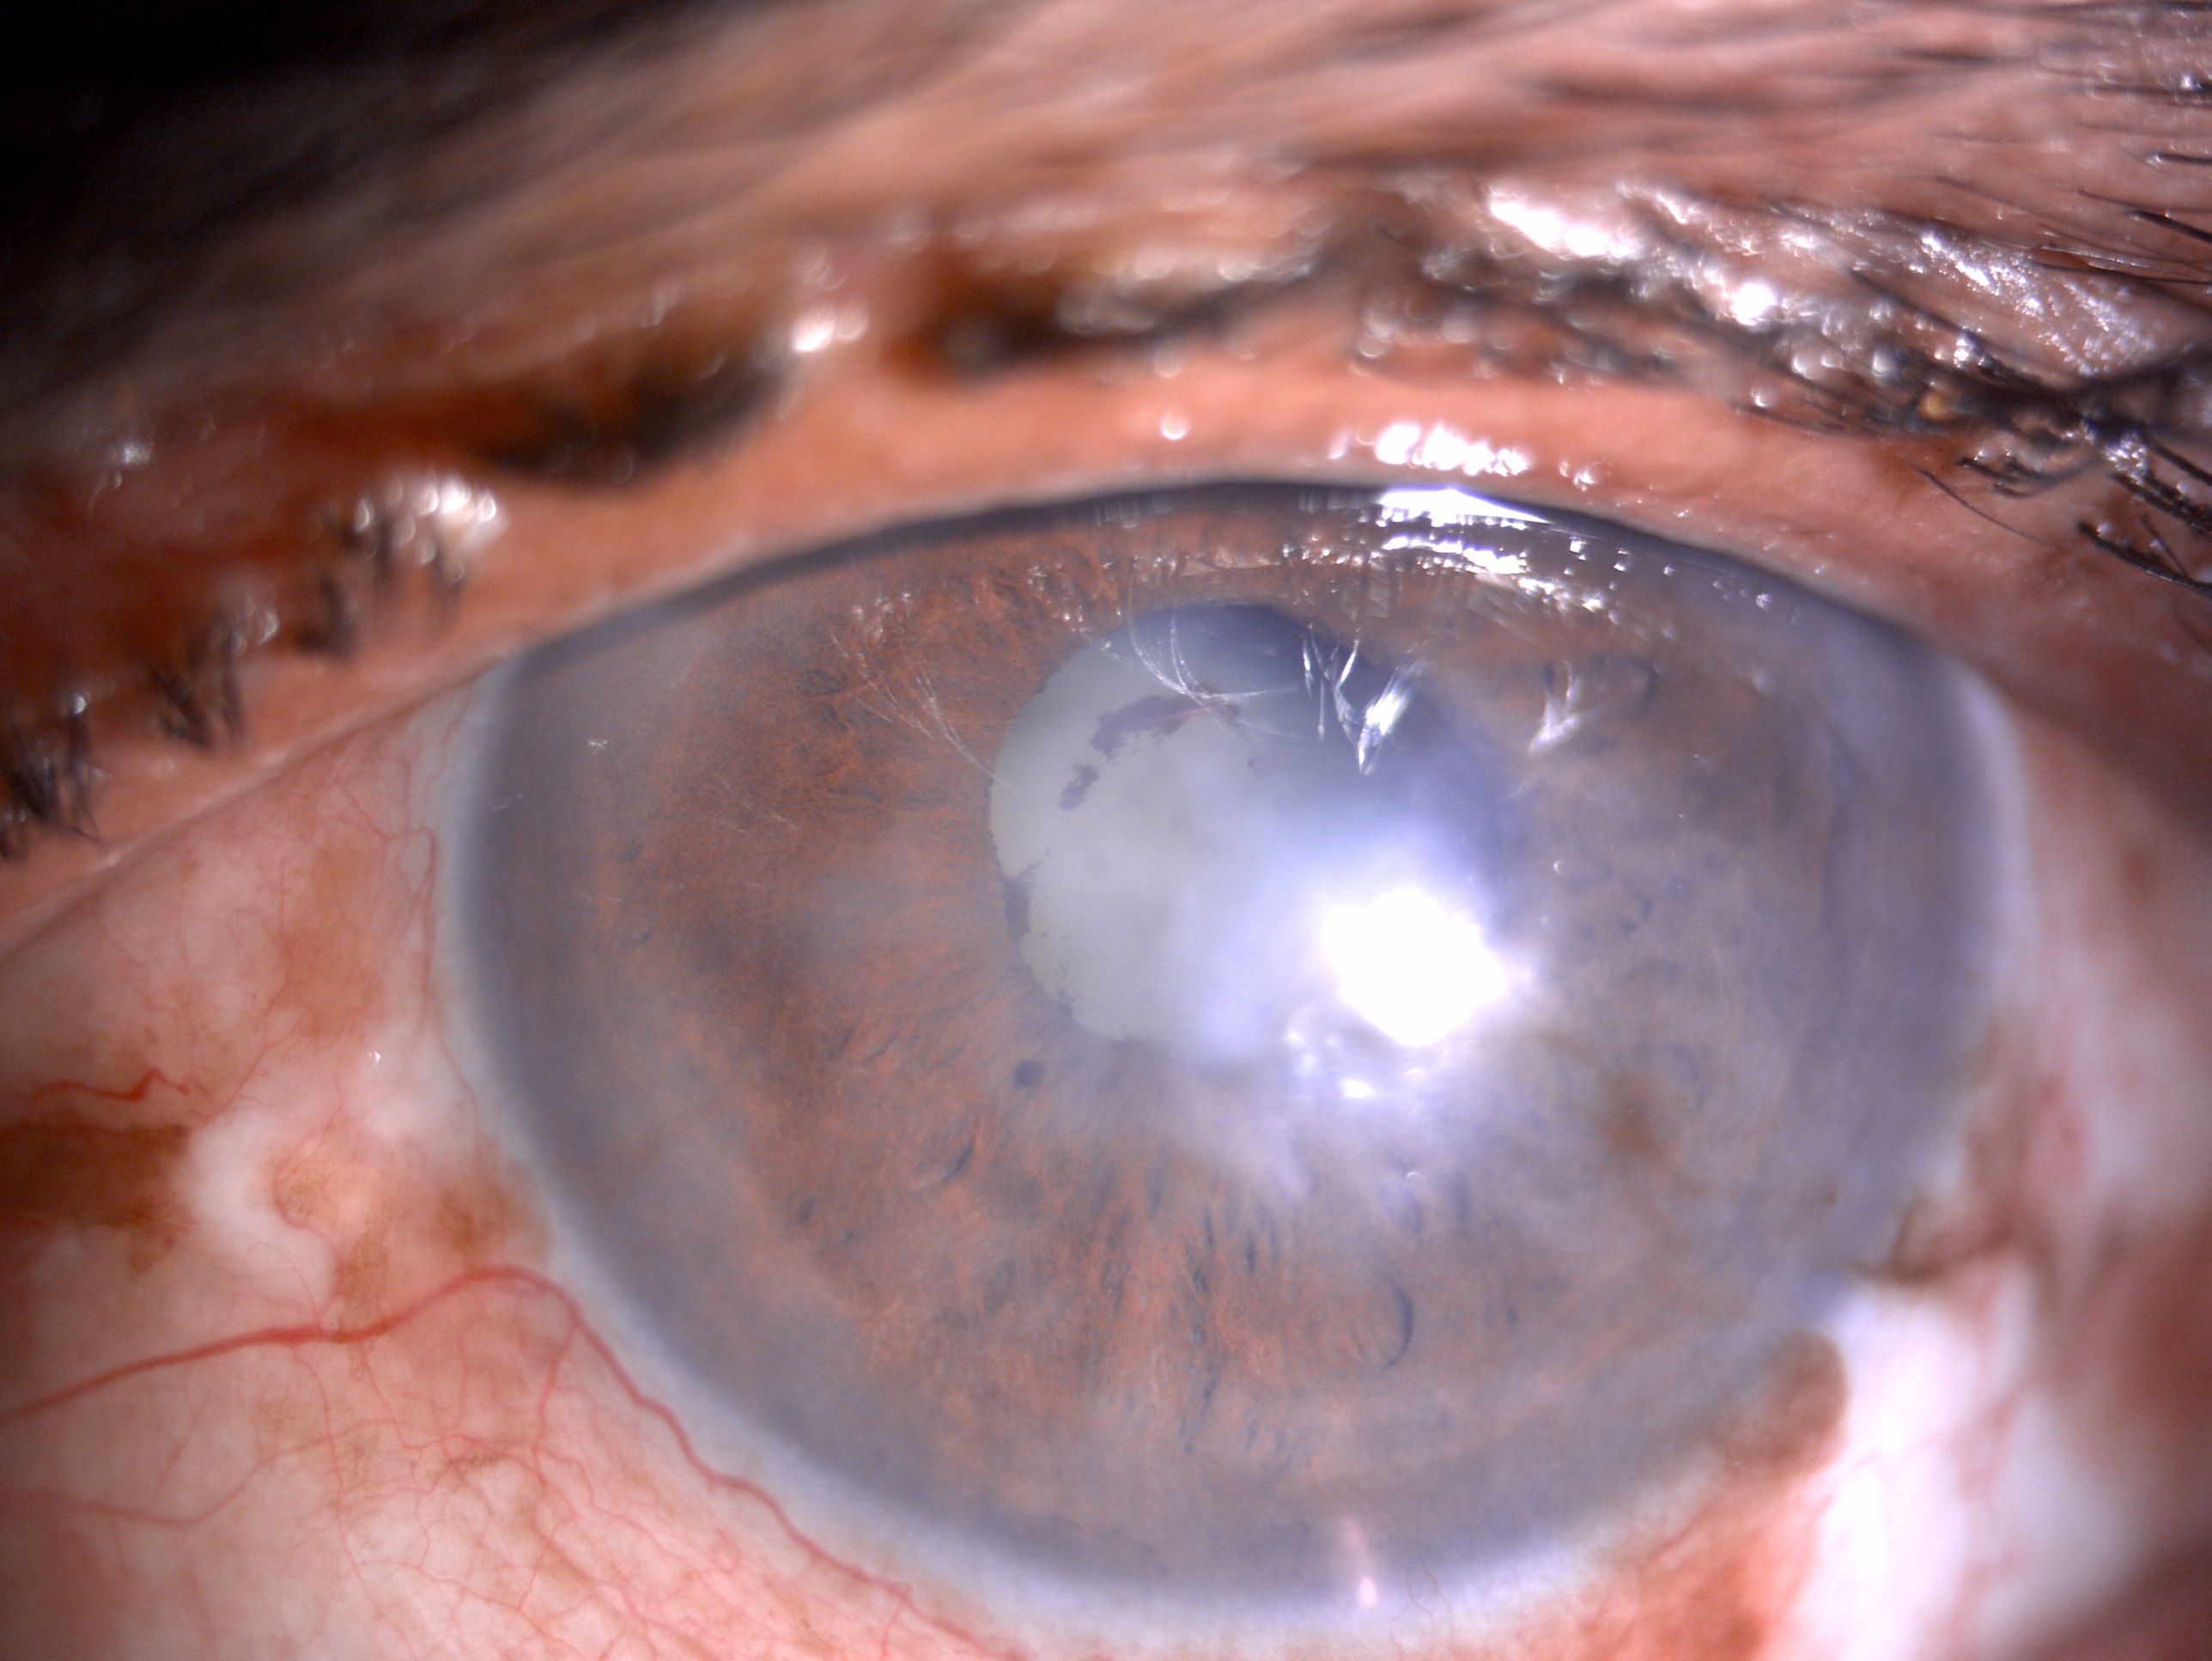 Slit- lamp image of the patient with recurrent uveitis depicting mild circumciliary congestion, nebular corneal scarring, few